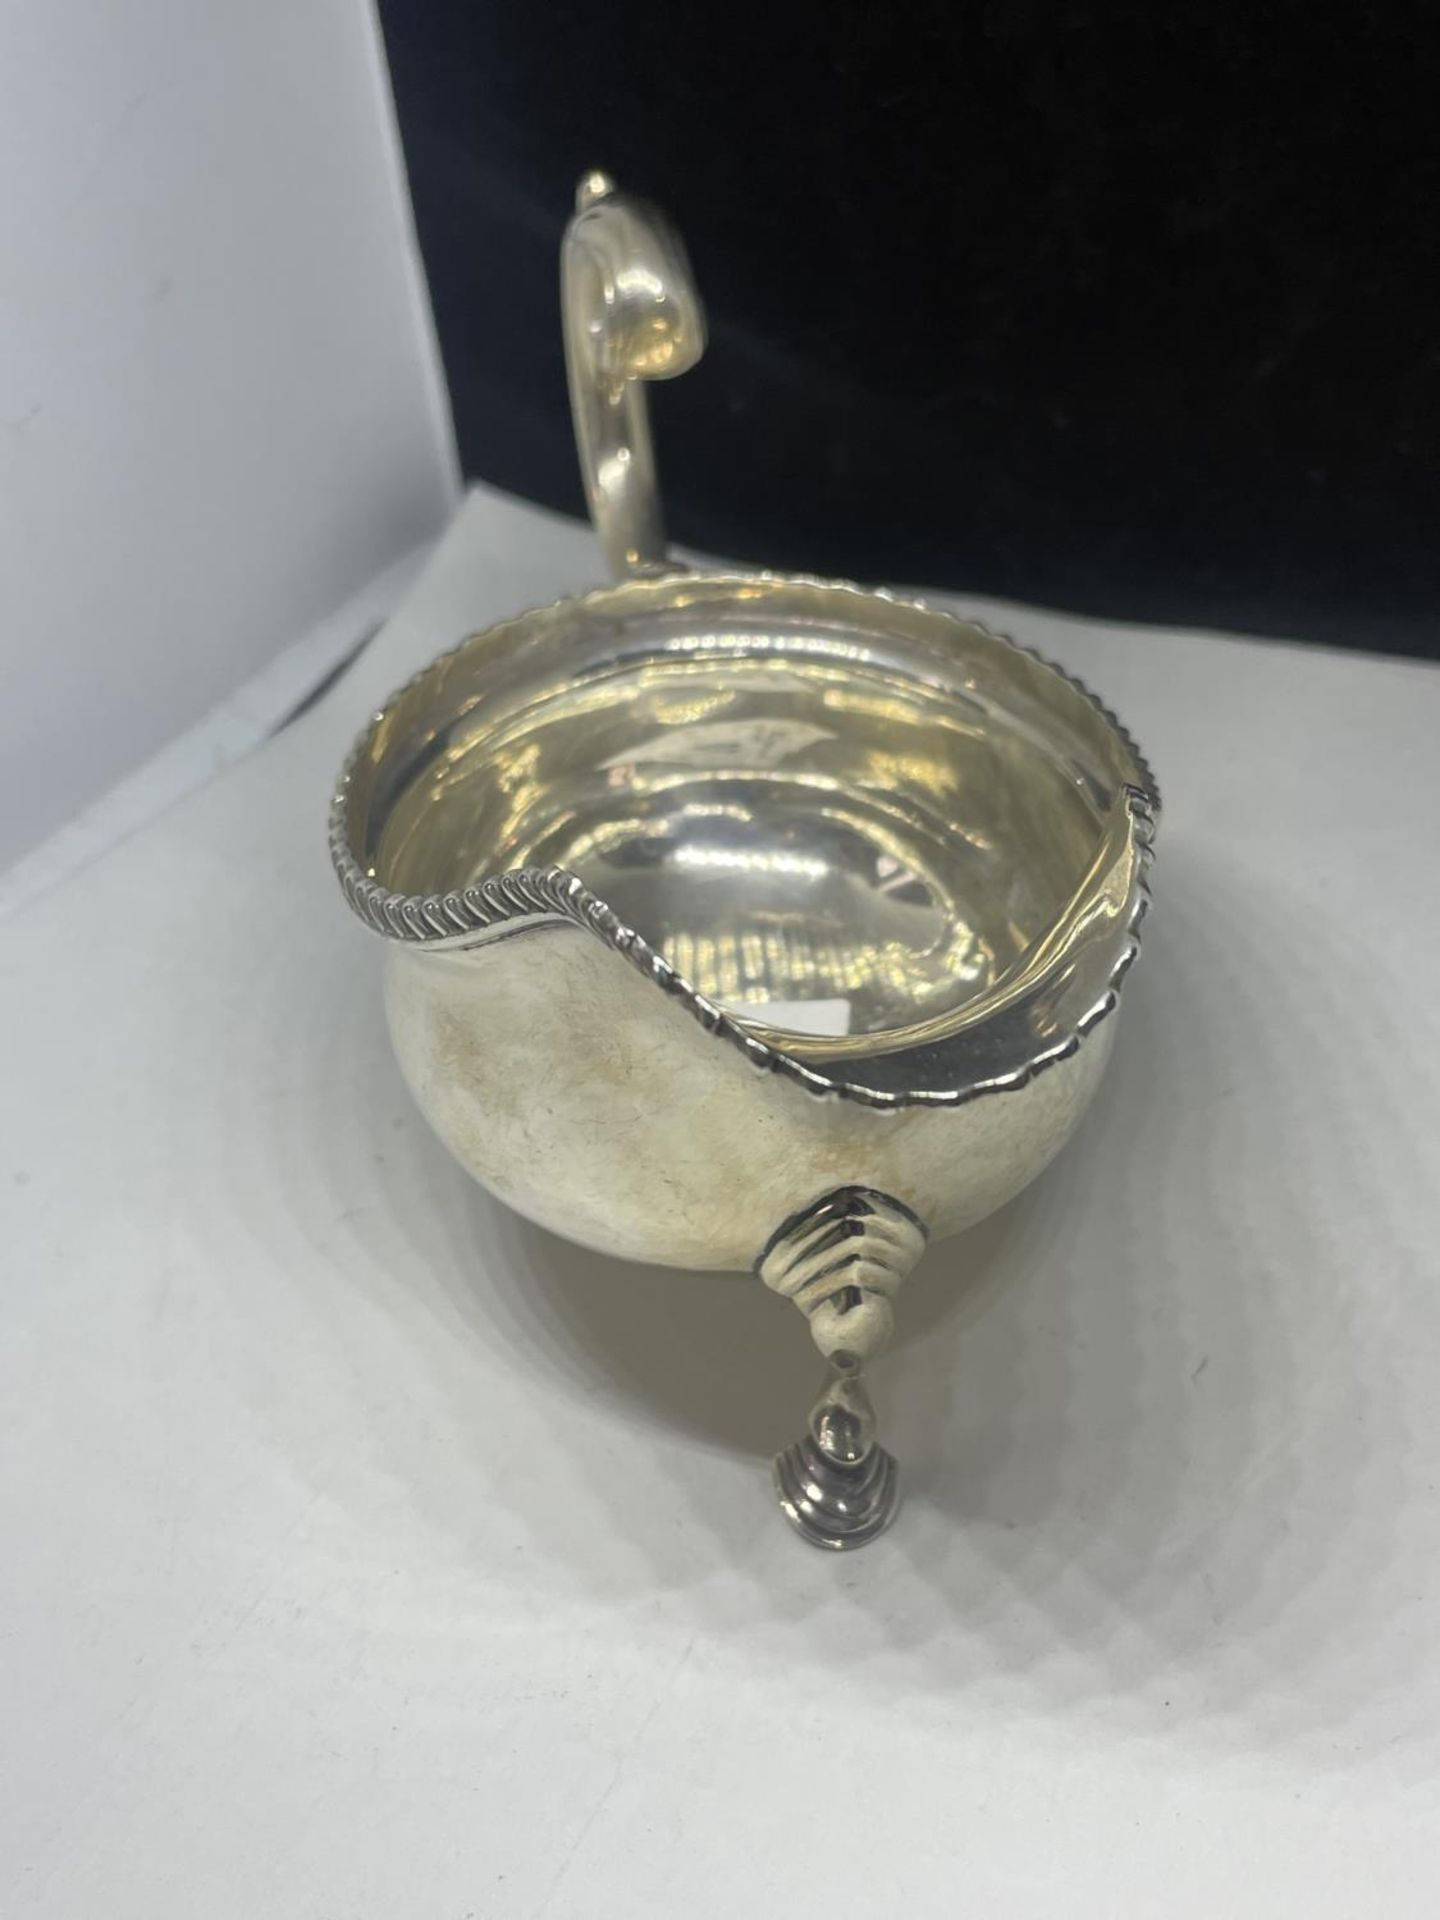 A BOODLE AND DUNTHORNE HALLMARKED CHESTER SILVER SAUCE BOAT GROSS WEIGHT 146.8 GRAMS - Image 2 of 4